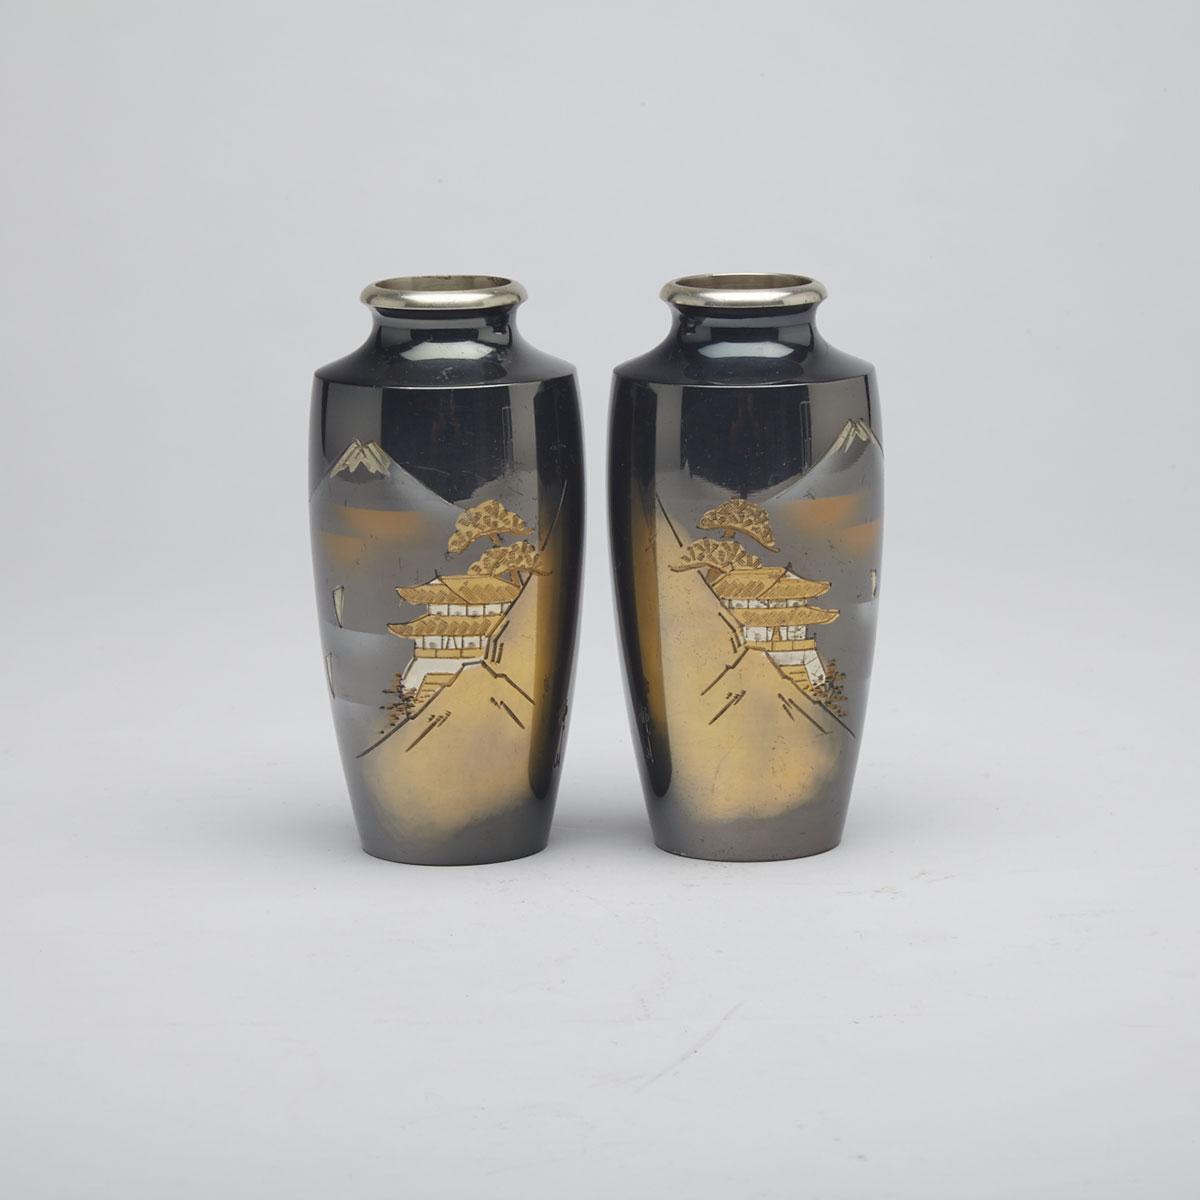 Pair of Miniature Silvered and Mixed-Metal Inlay Vases, Signed, Japan, Mid-20th Century